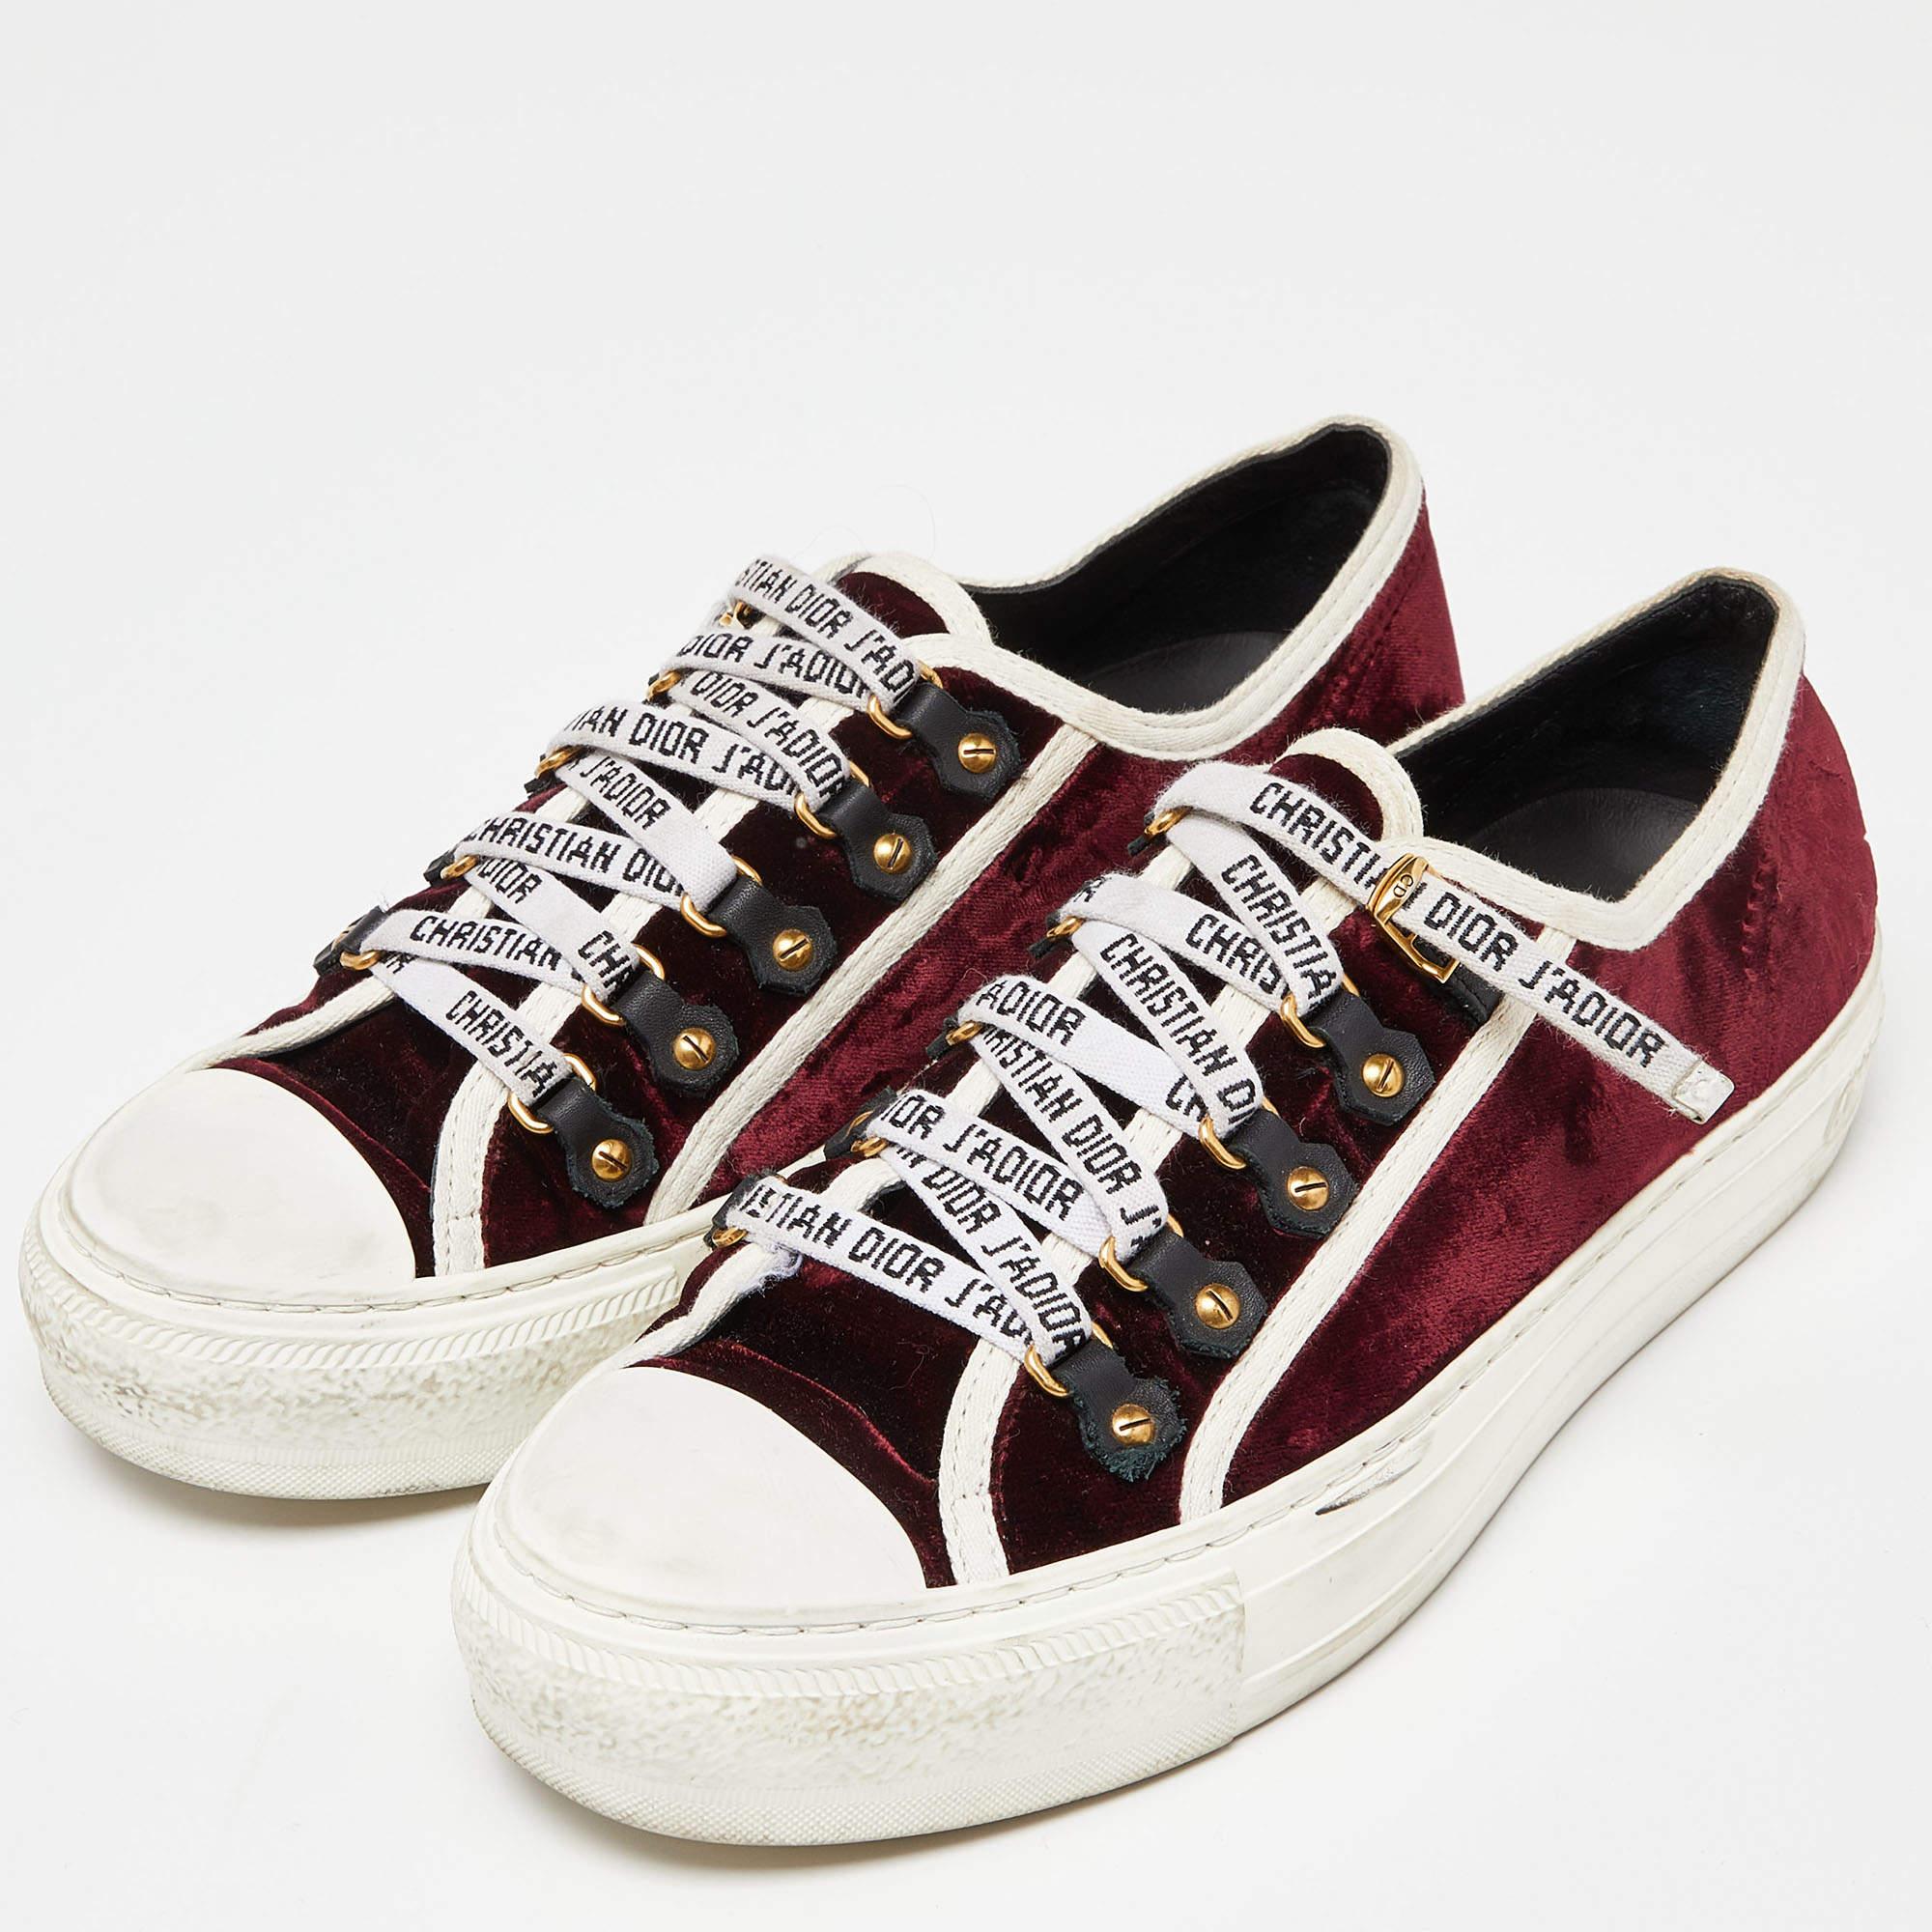 Give your outfit a luxe update with this pair of Dior sneakers. The shoes are sewn perfectly to help you make a statement in them for a long time.

